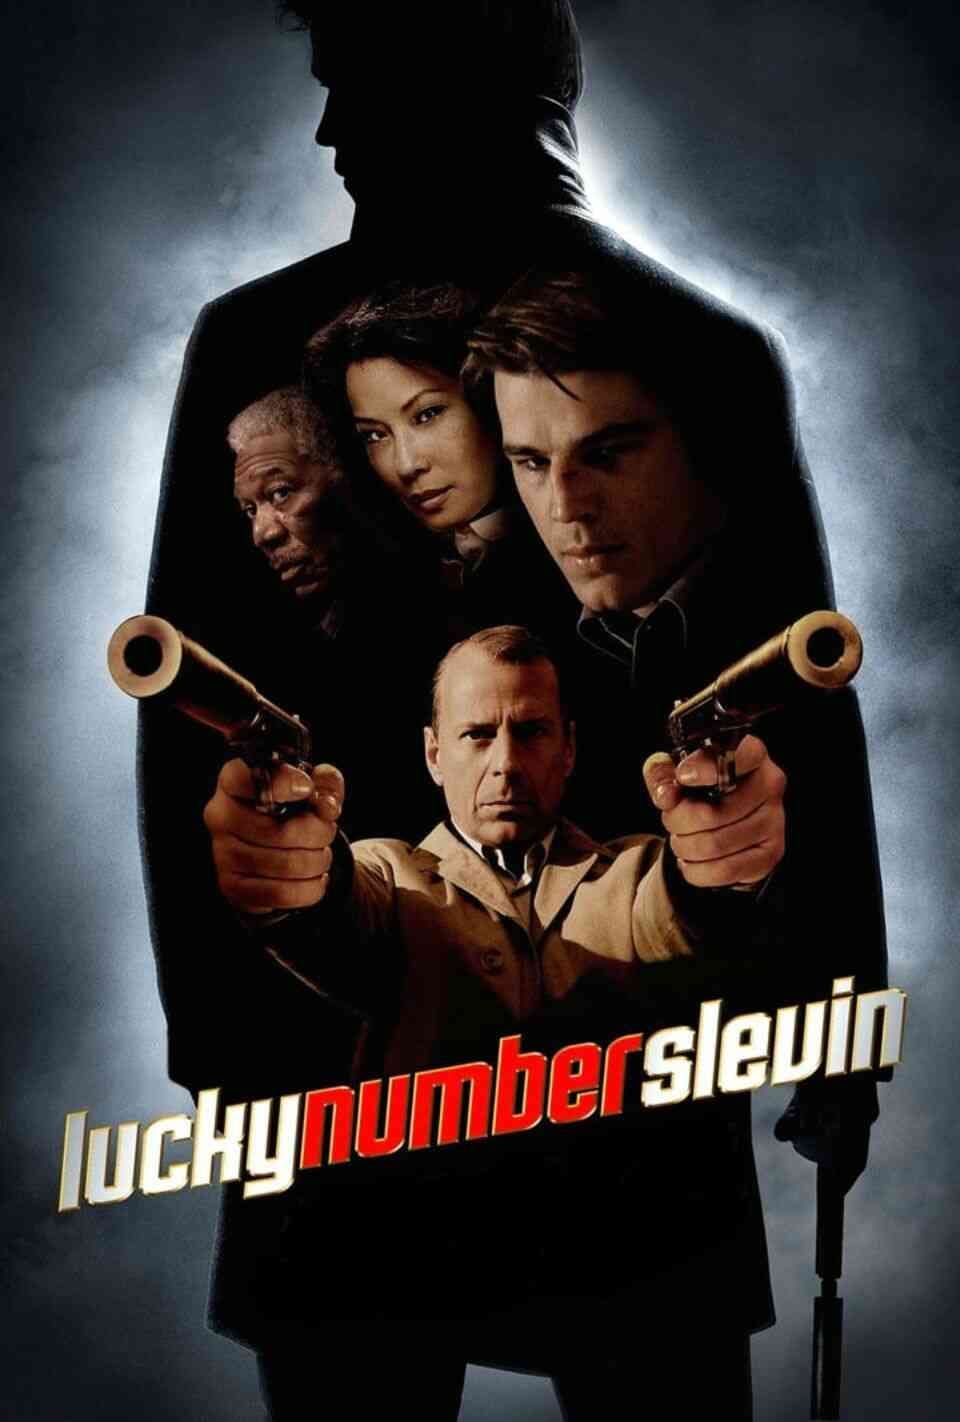 Read Lucky Number Slevin screenplay (poster)